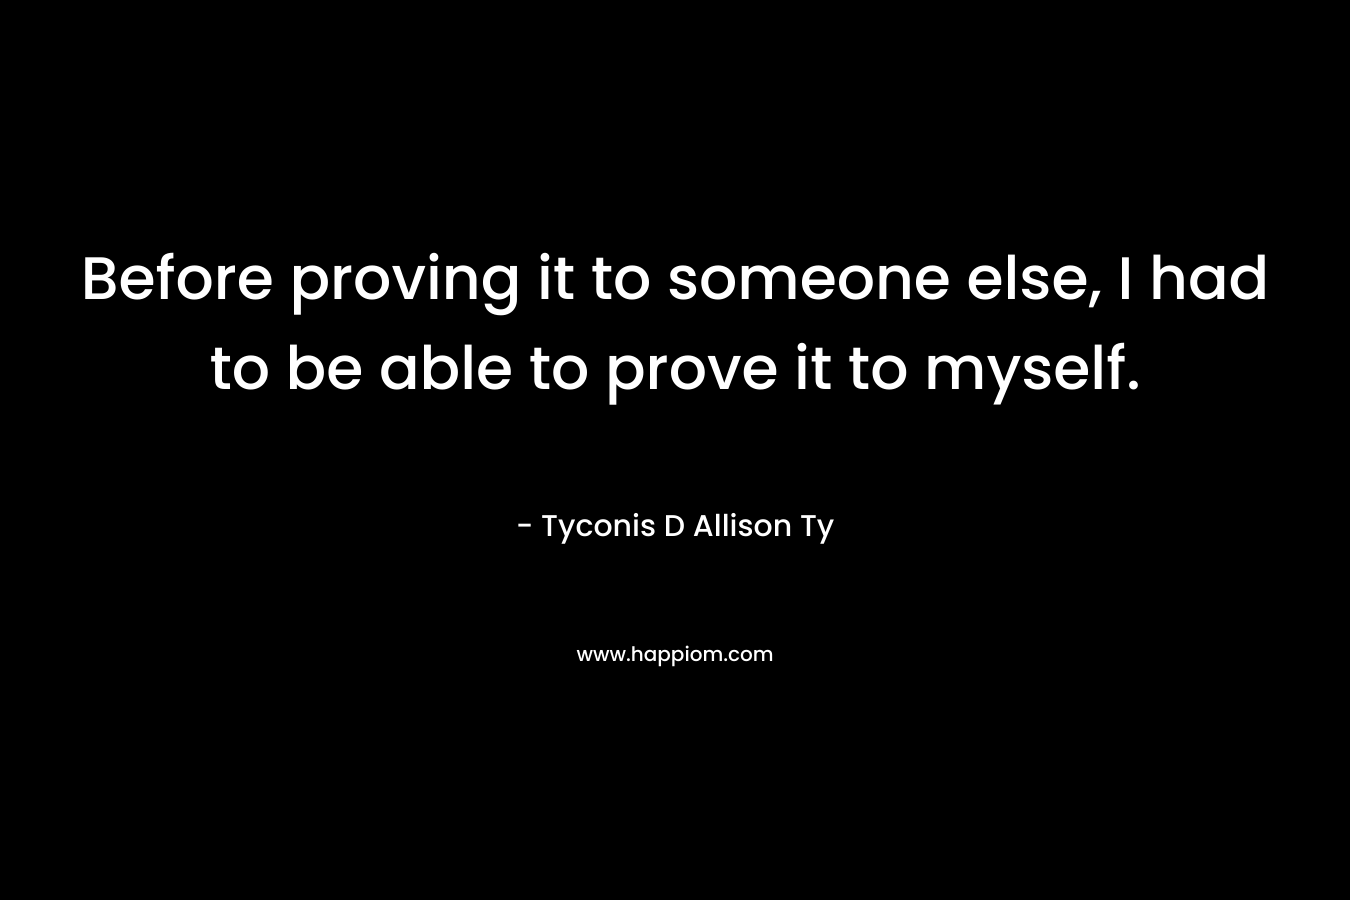 Before proving it to someone else, I had to be able to prove it to myself. – Tyconis D Allison Ty